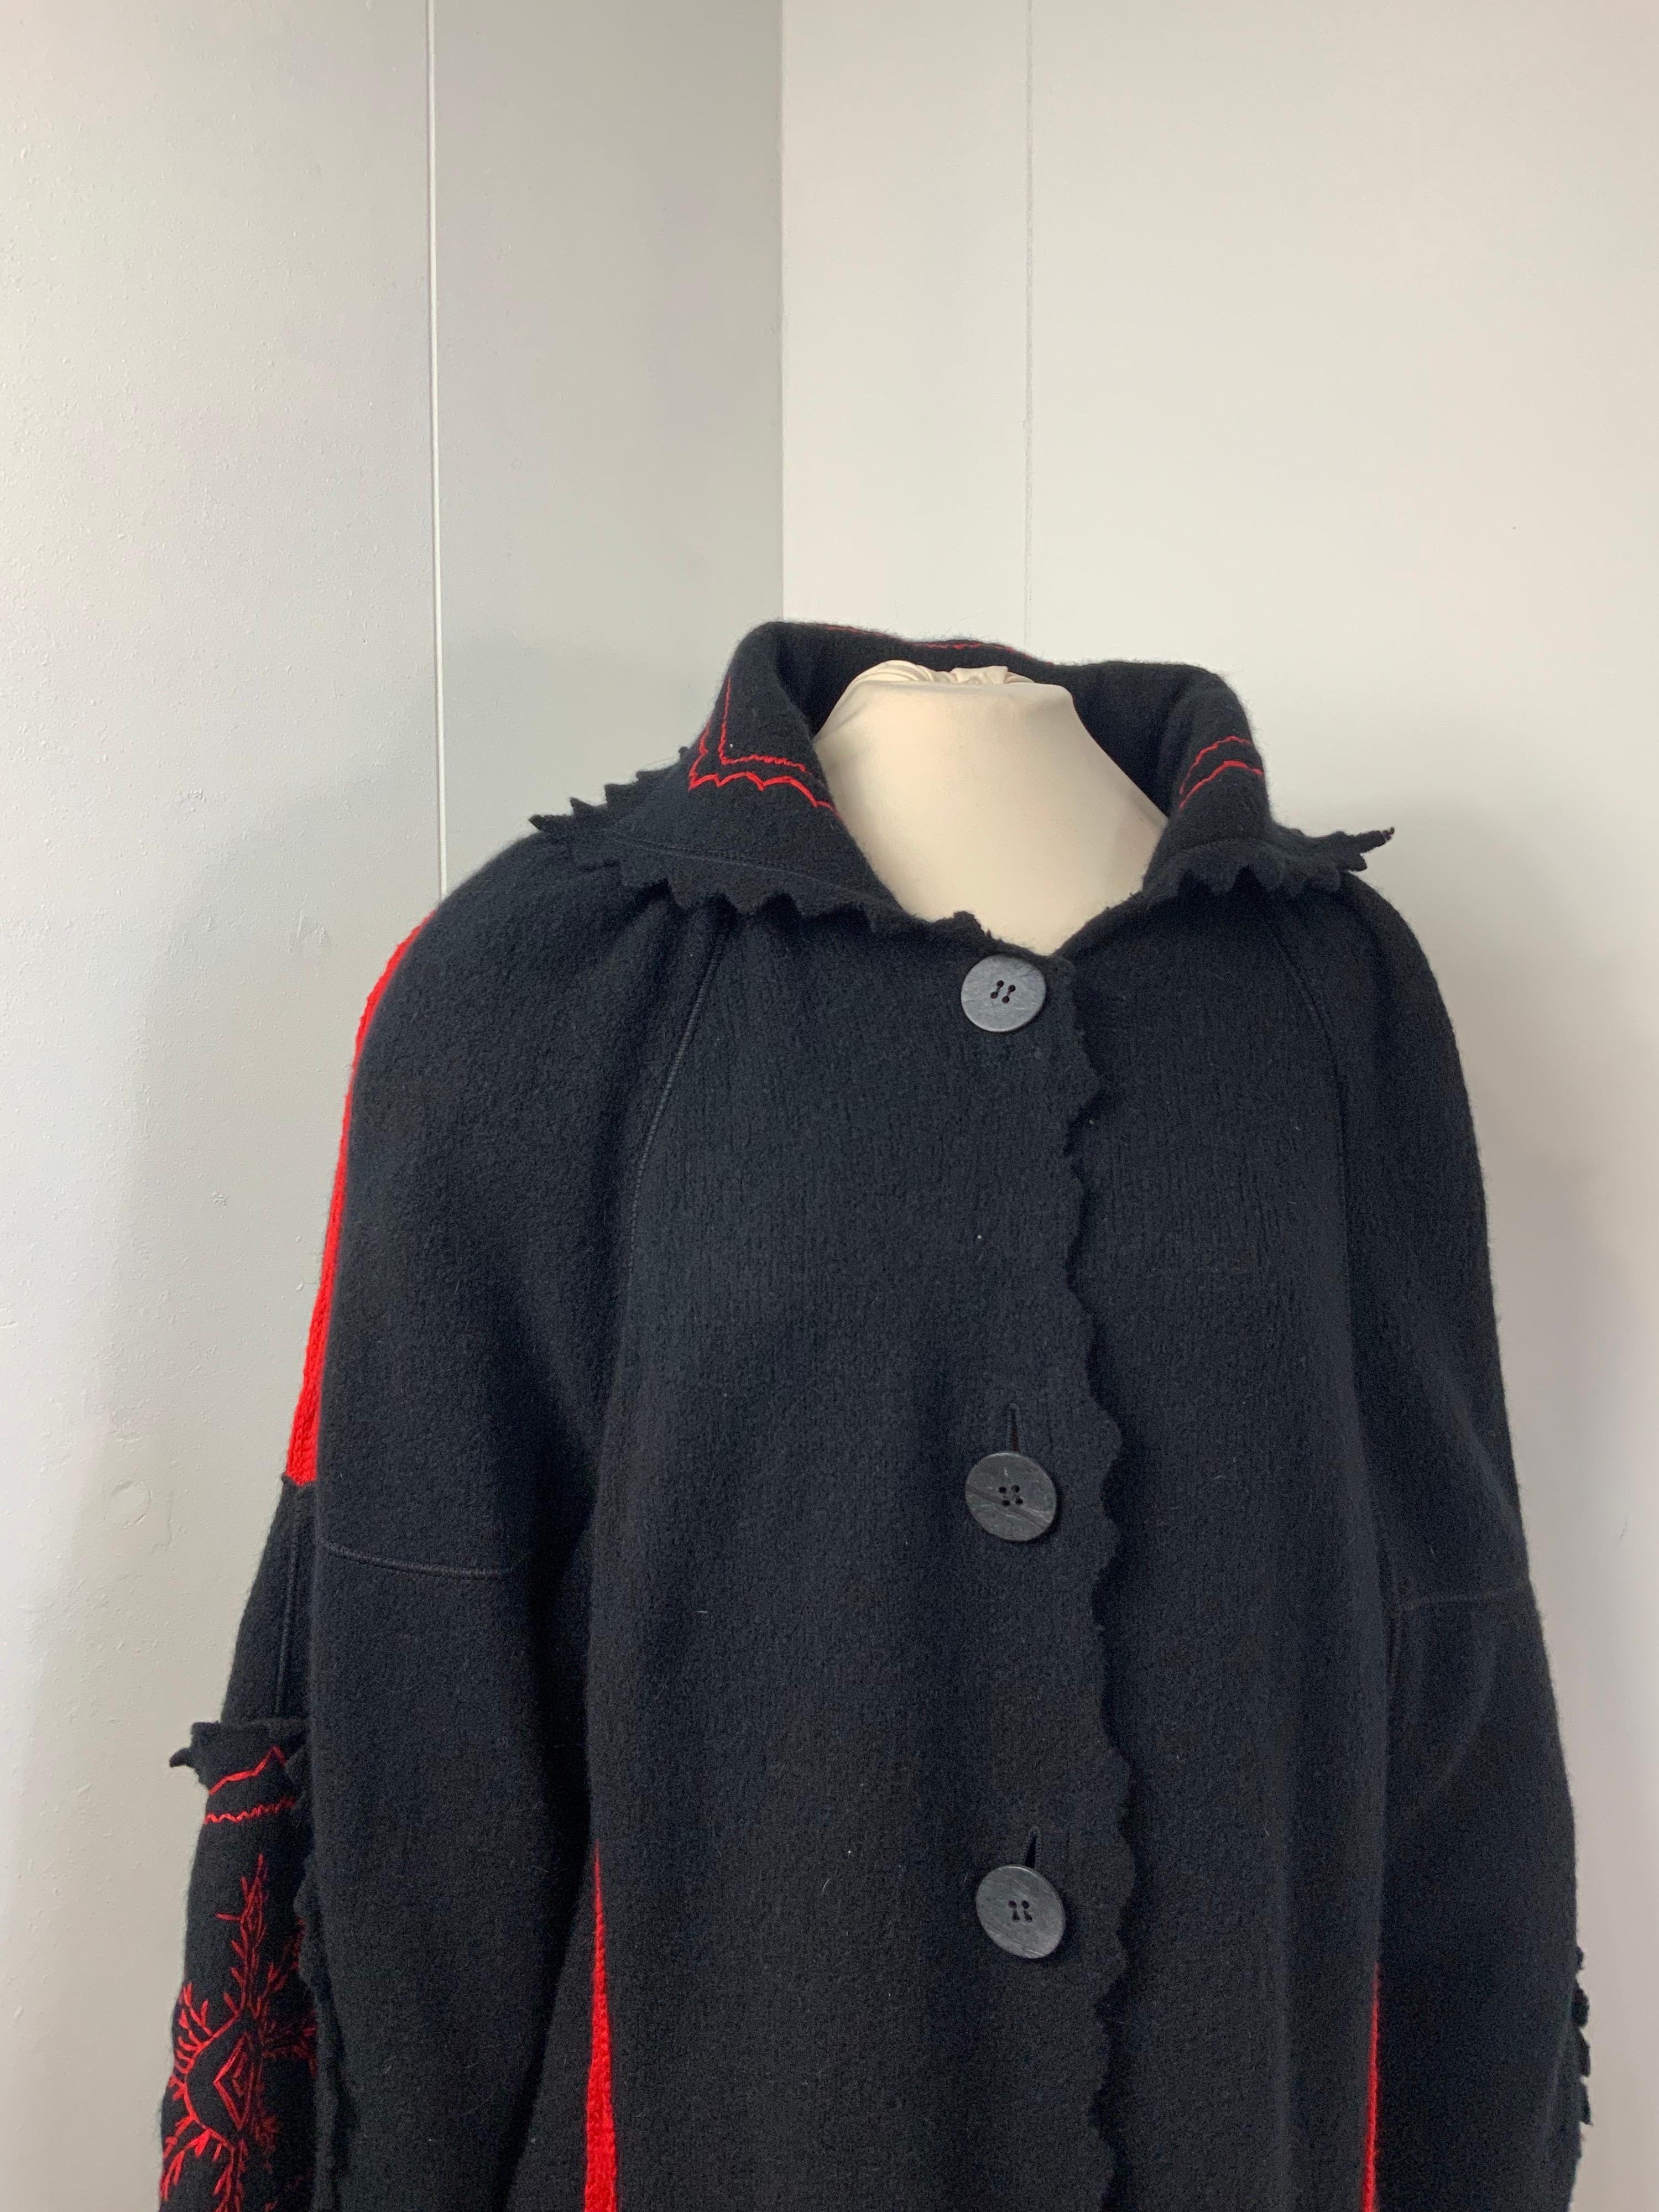 Dior Boutique Paris Coat.
Fabric is a mix between wool, angora, polyamide and elastane.
Featuring snowflake patch, perfect for wintertime.
Size M.
Measurements:
Shoulders 44 cm
Bust 55 cm
Length 106 cm
Sleeves 82 cm 
Conditions: Good - Previously